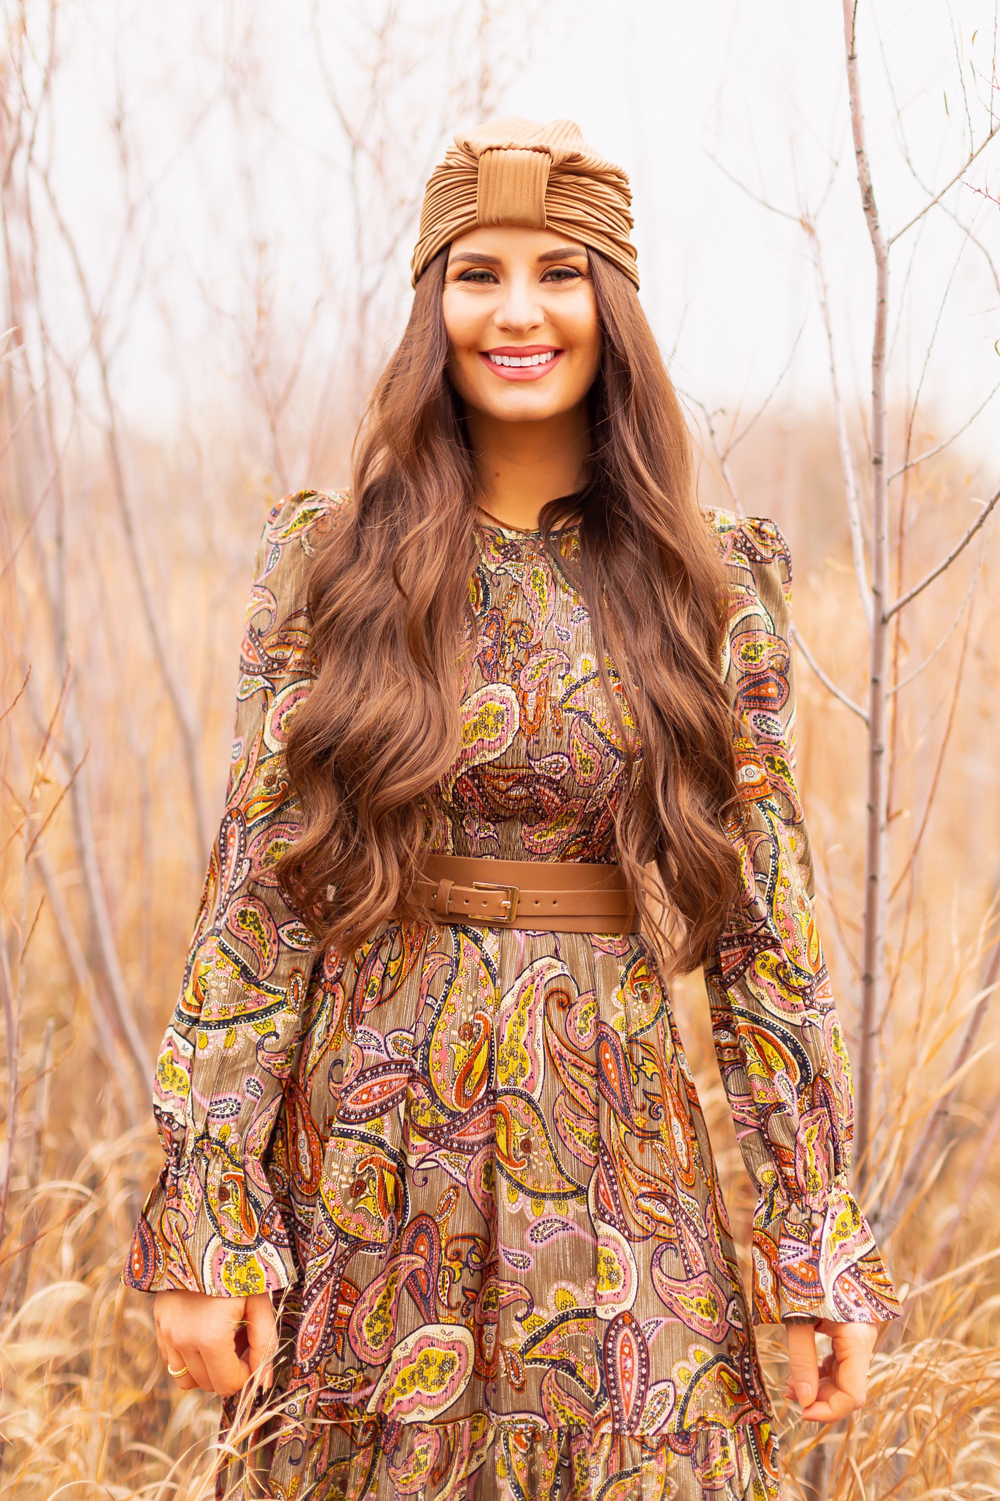 6 Luxe Bohemian Fall Outfits | Organic Olive | Smiling brunette woman with wavy waist long hair wearing an olive paisley maxi dress, taupe corset belt and an exotic taupe hat  amongst wild fall grasses in a willow grove | Boho Fall 2022 Outfit Ideas | Feminine Bohemian Style | Polished Bohemian Style | Elegant Bohemian Style | Bohemian Outfit Ideas | How to Style a Paisley Maxi Dress for Fall | Calgary Alberta Fashion Blogger // JustineCelina.com